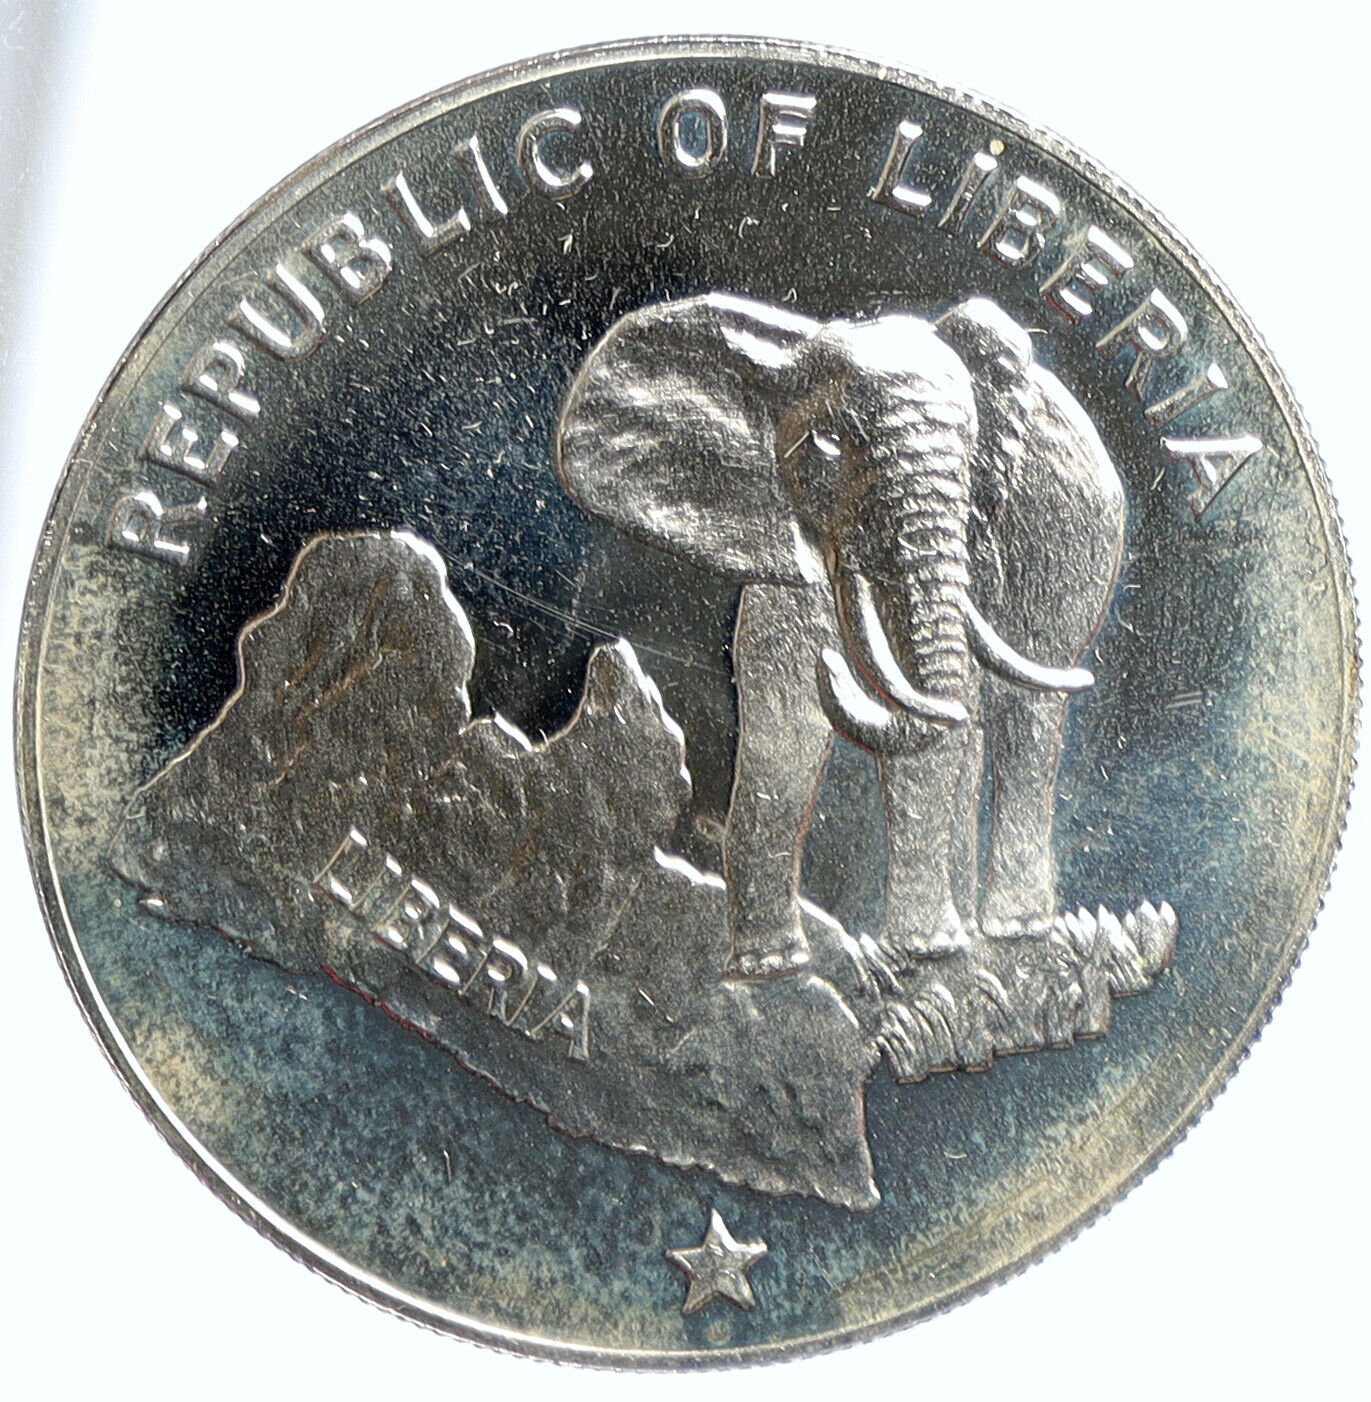 1975 LIBERIA State Map with Elephant OLD VINTAGE Proof Silver $5 Coin i113404